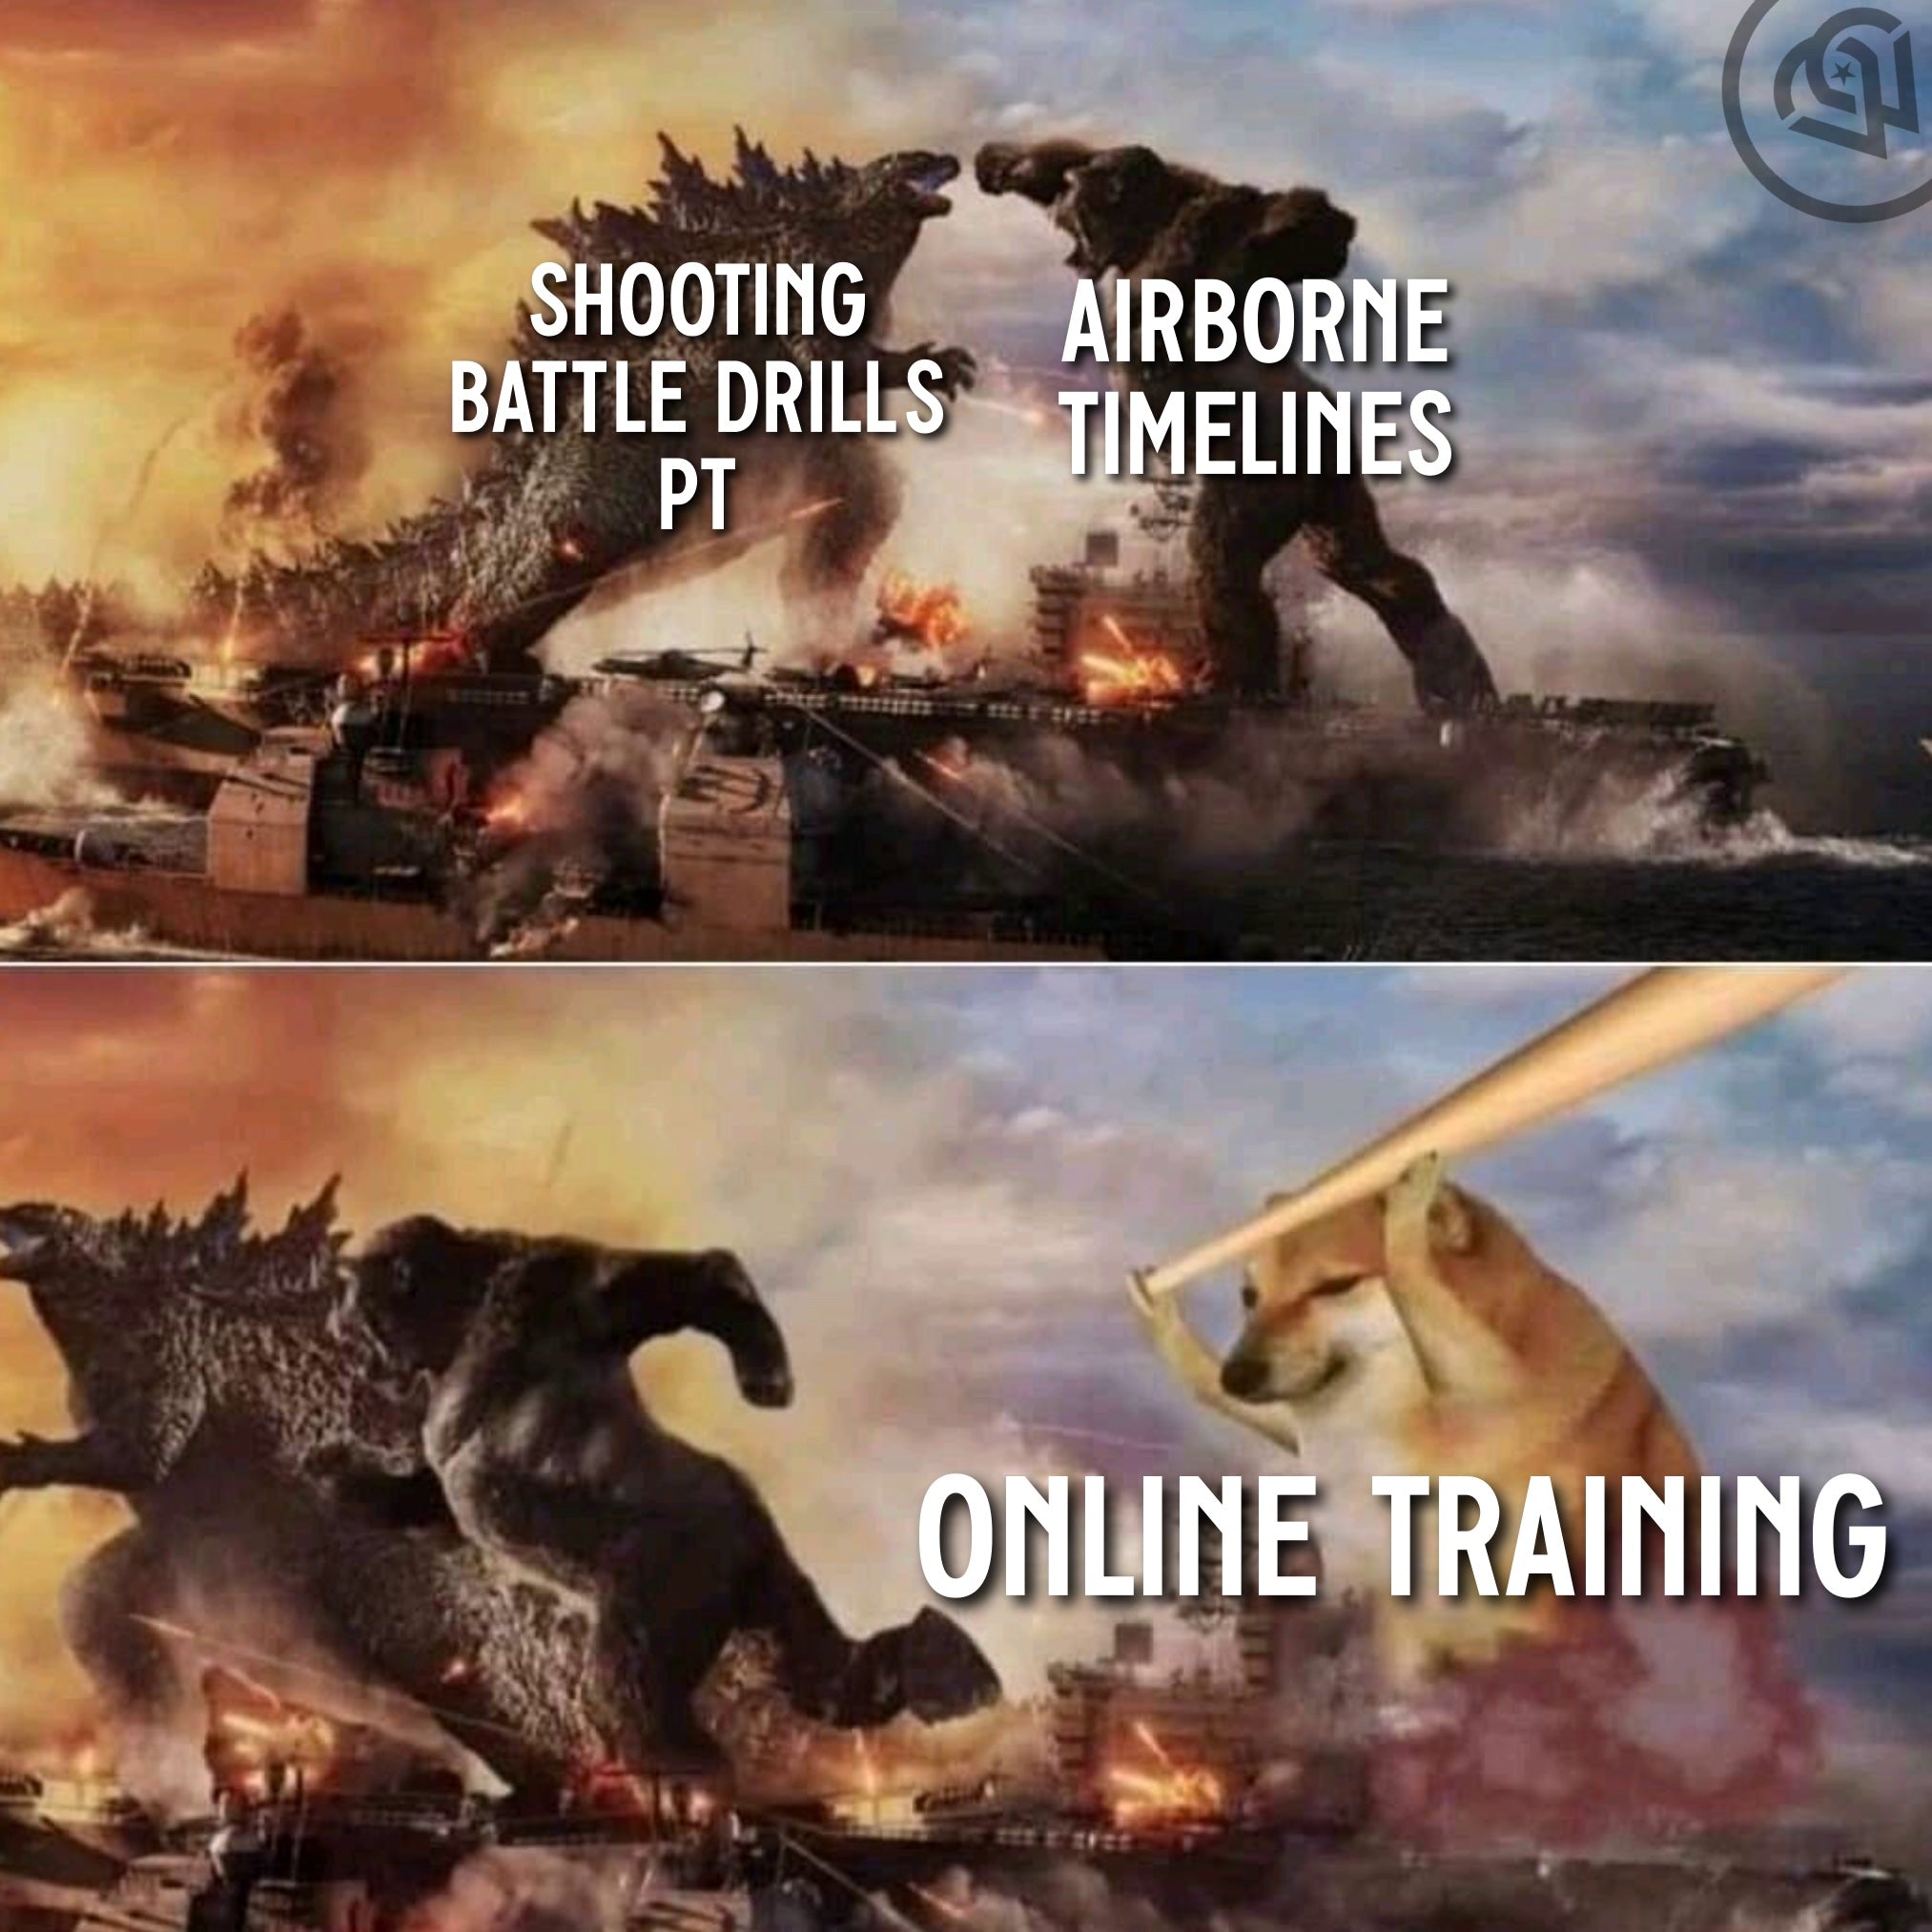 Online Training Conquers All